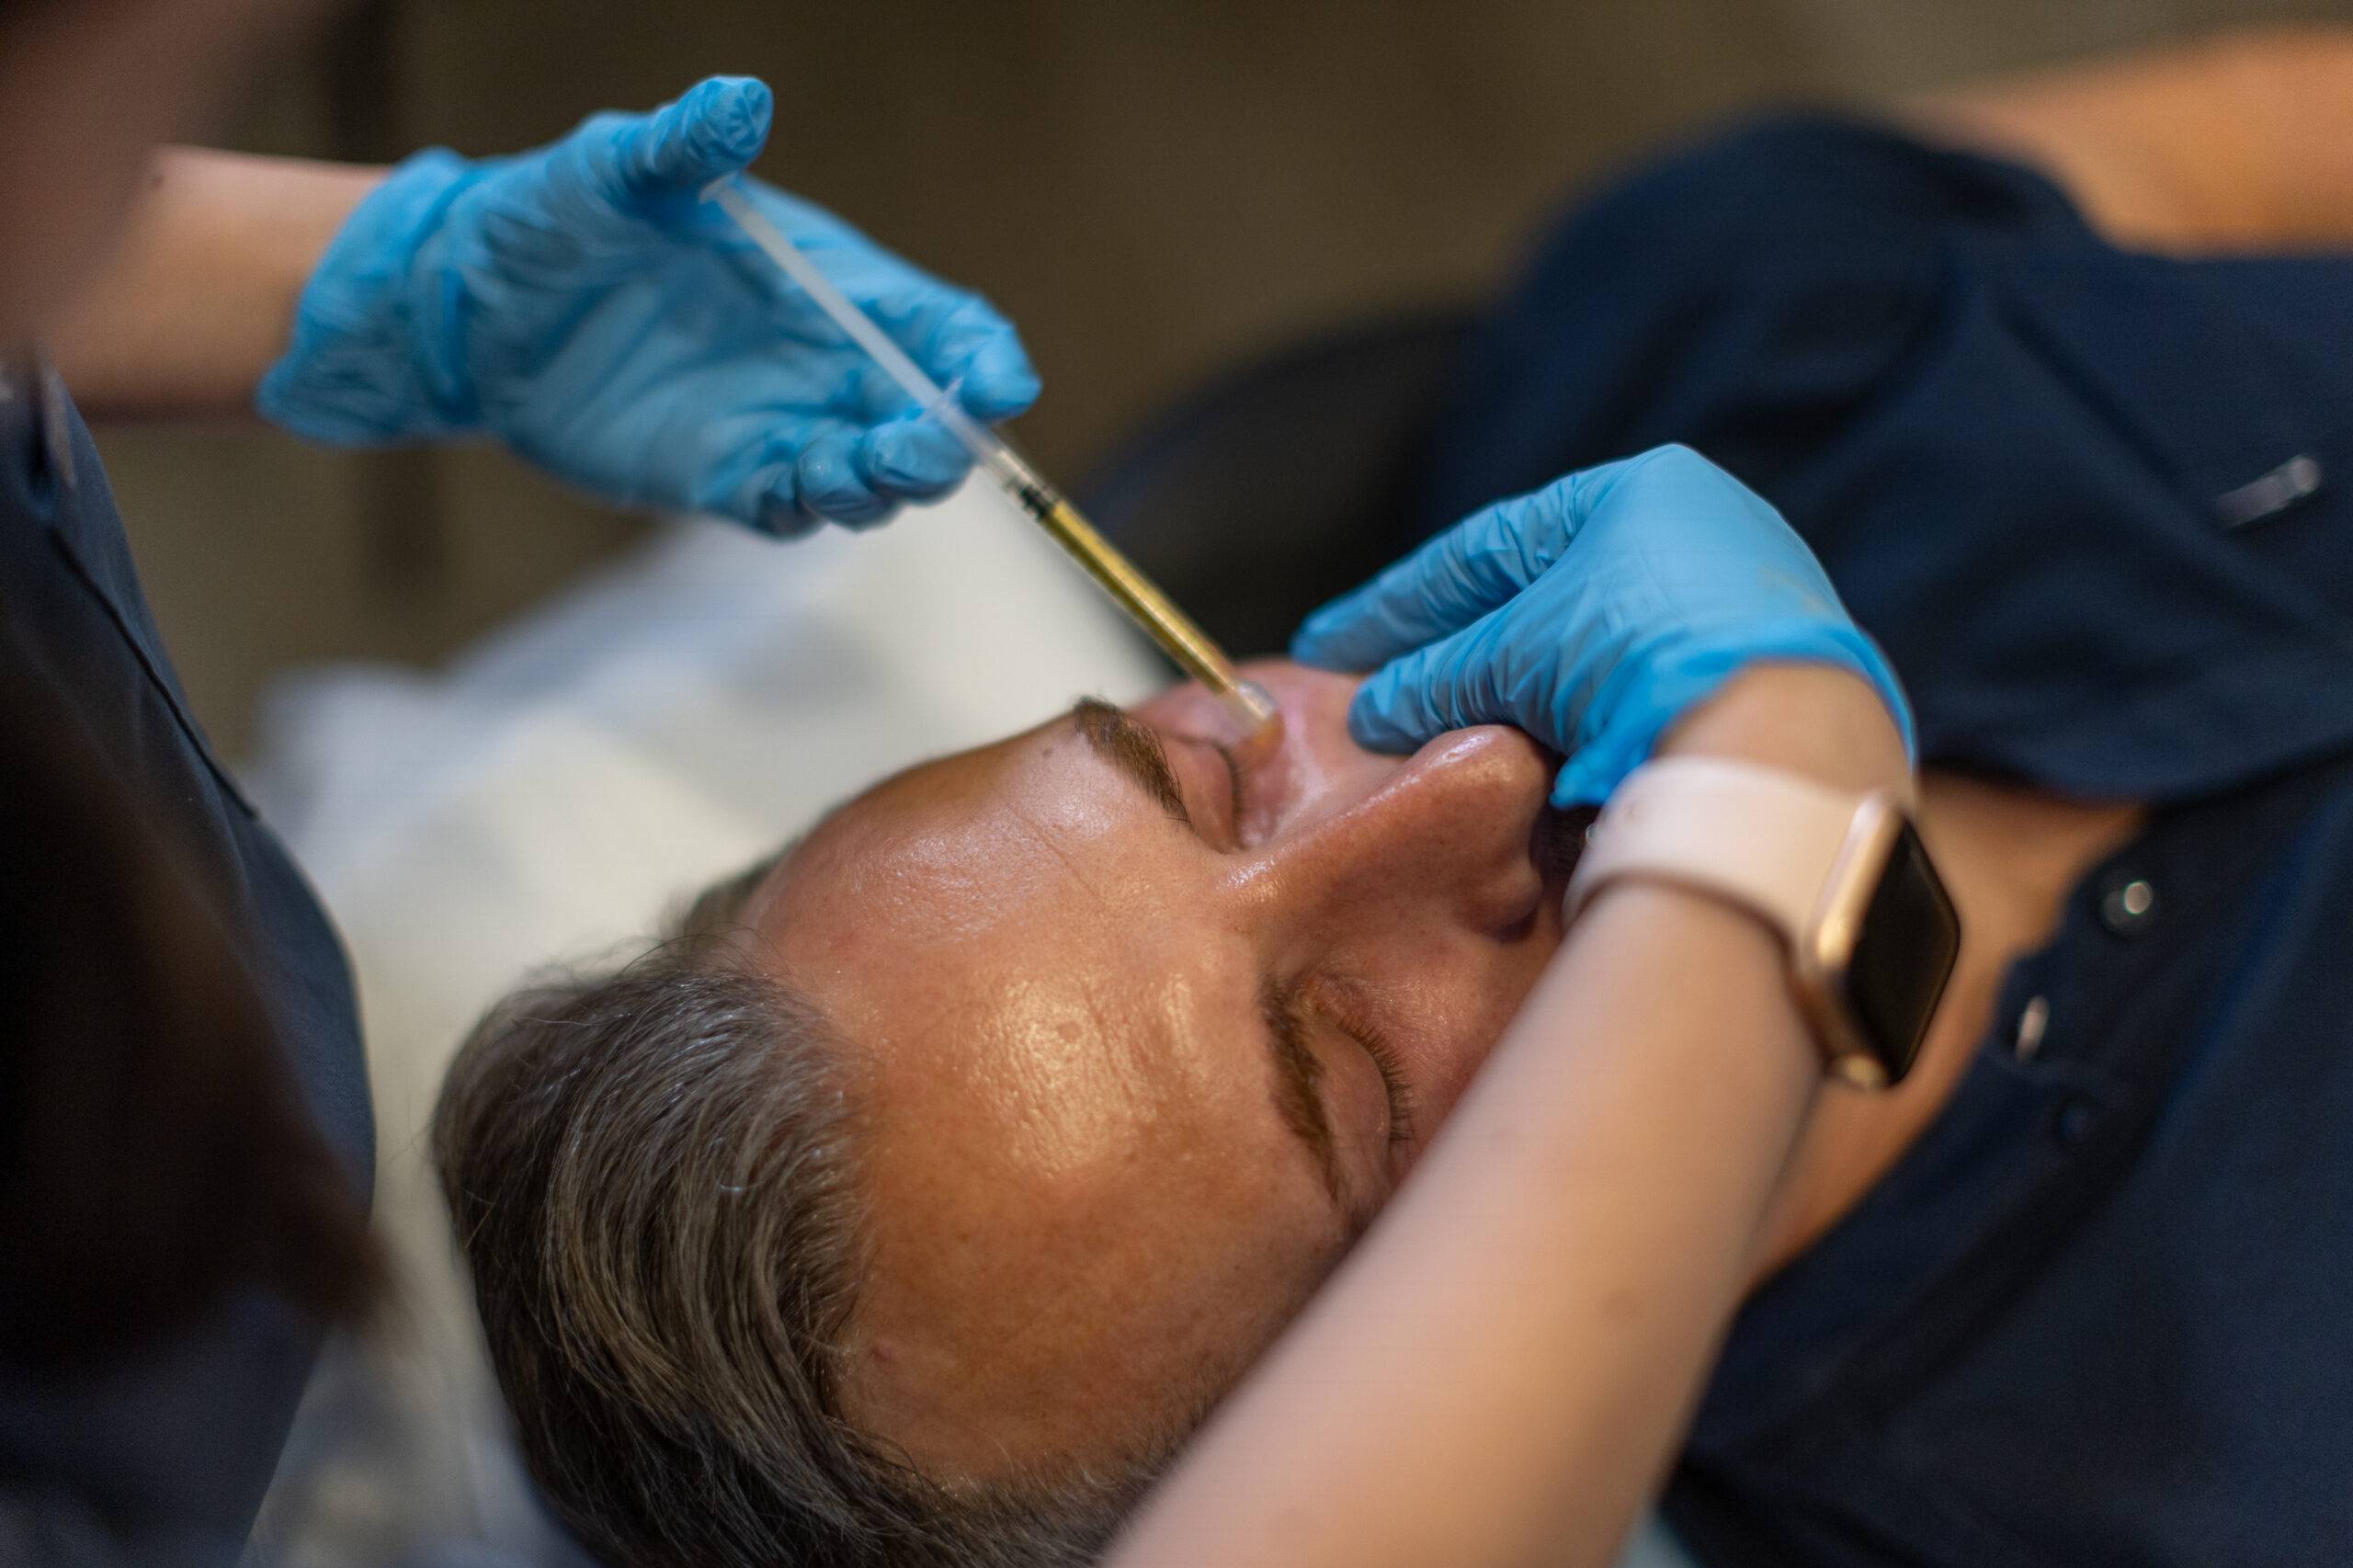 A close-up of a person receiving a skin rejuvenation treatment, with a practitioner in blue gloves applying a product with a brush-like tool to their forehead.